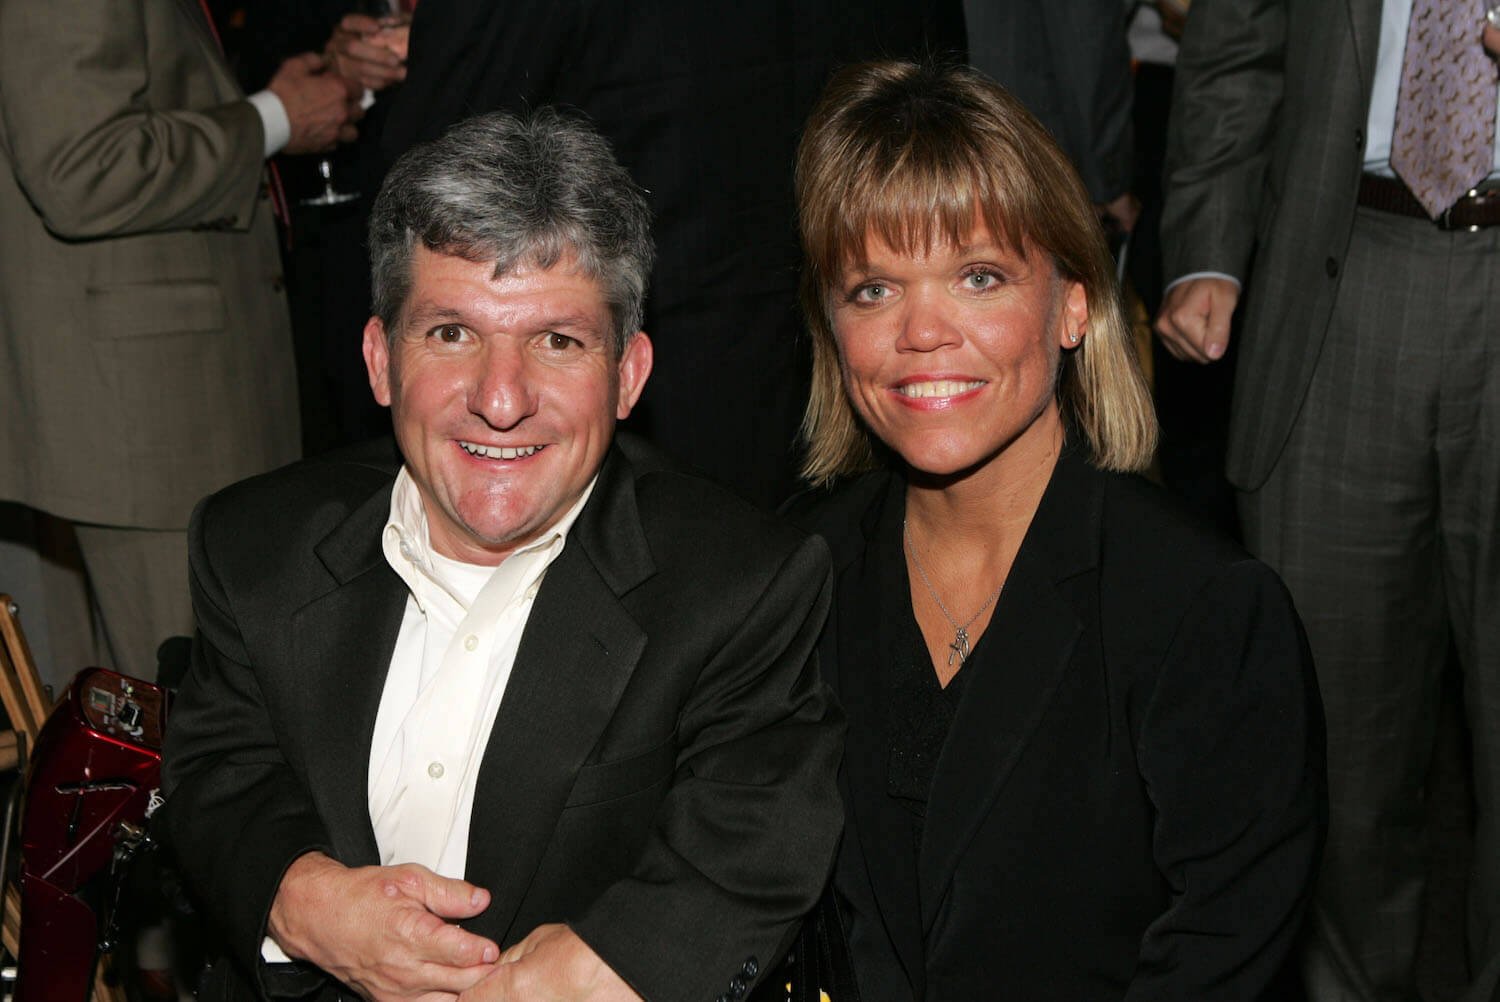 Matt Roloff and Amy Roloff from 'Little People, Big World' sitting together against a black background